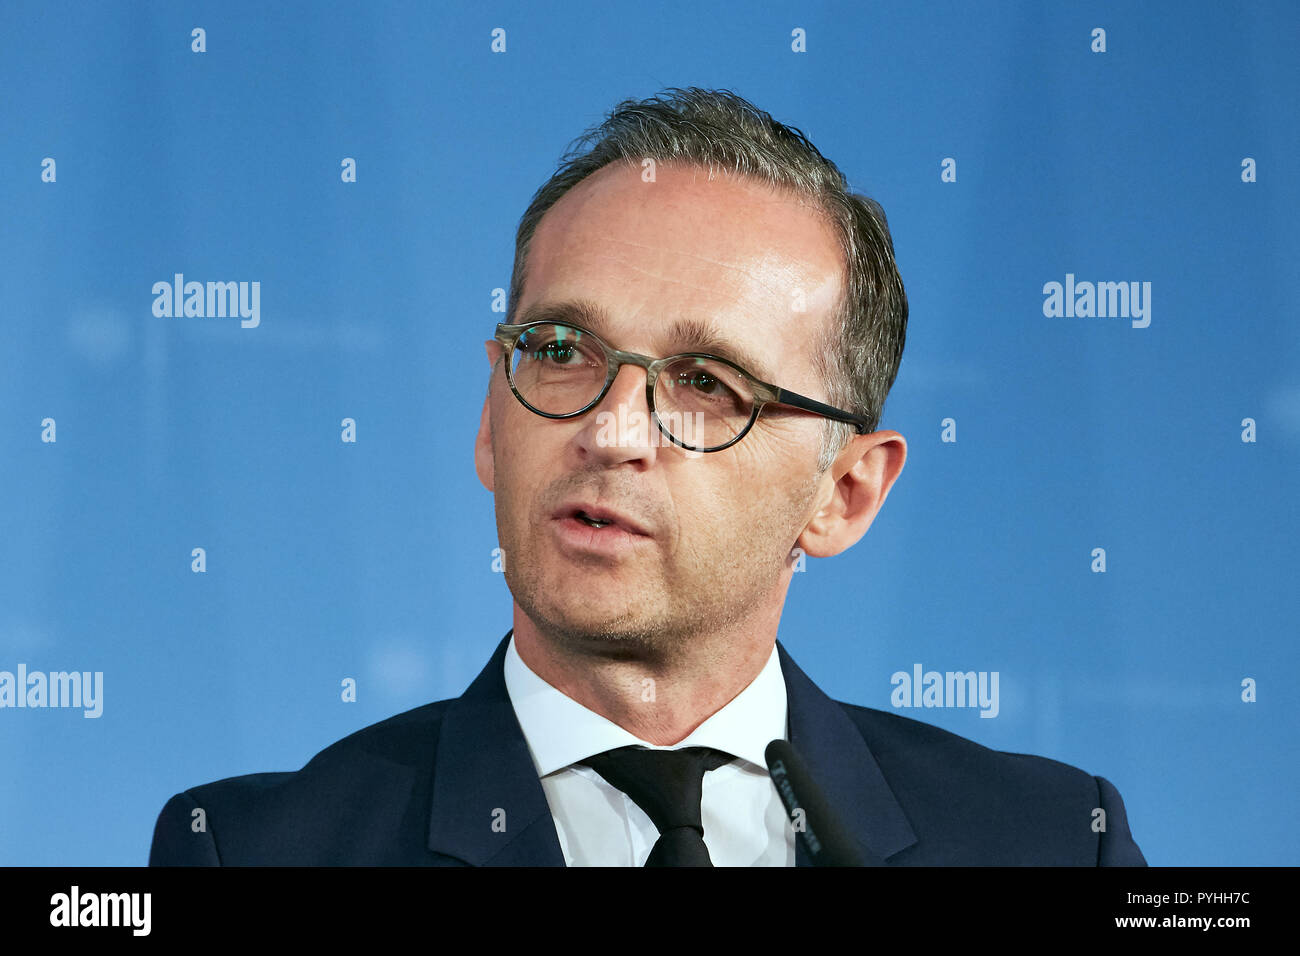 Berlin, Germany - Federal Foreign Minister Heiko Maas. Stock Photo